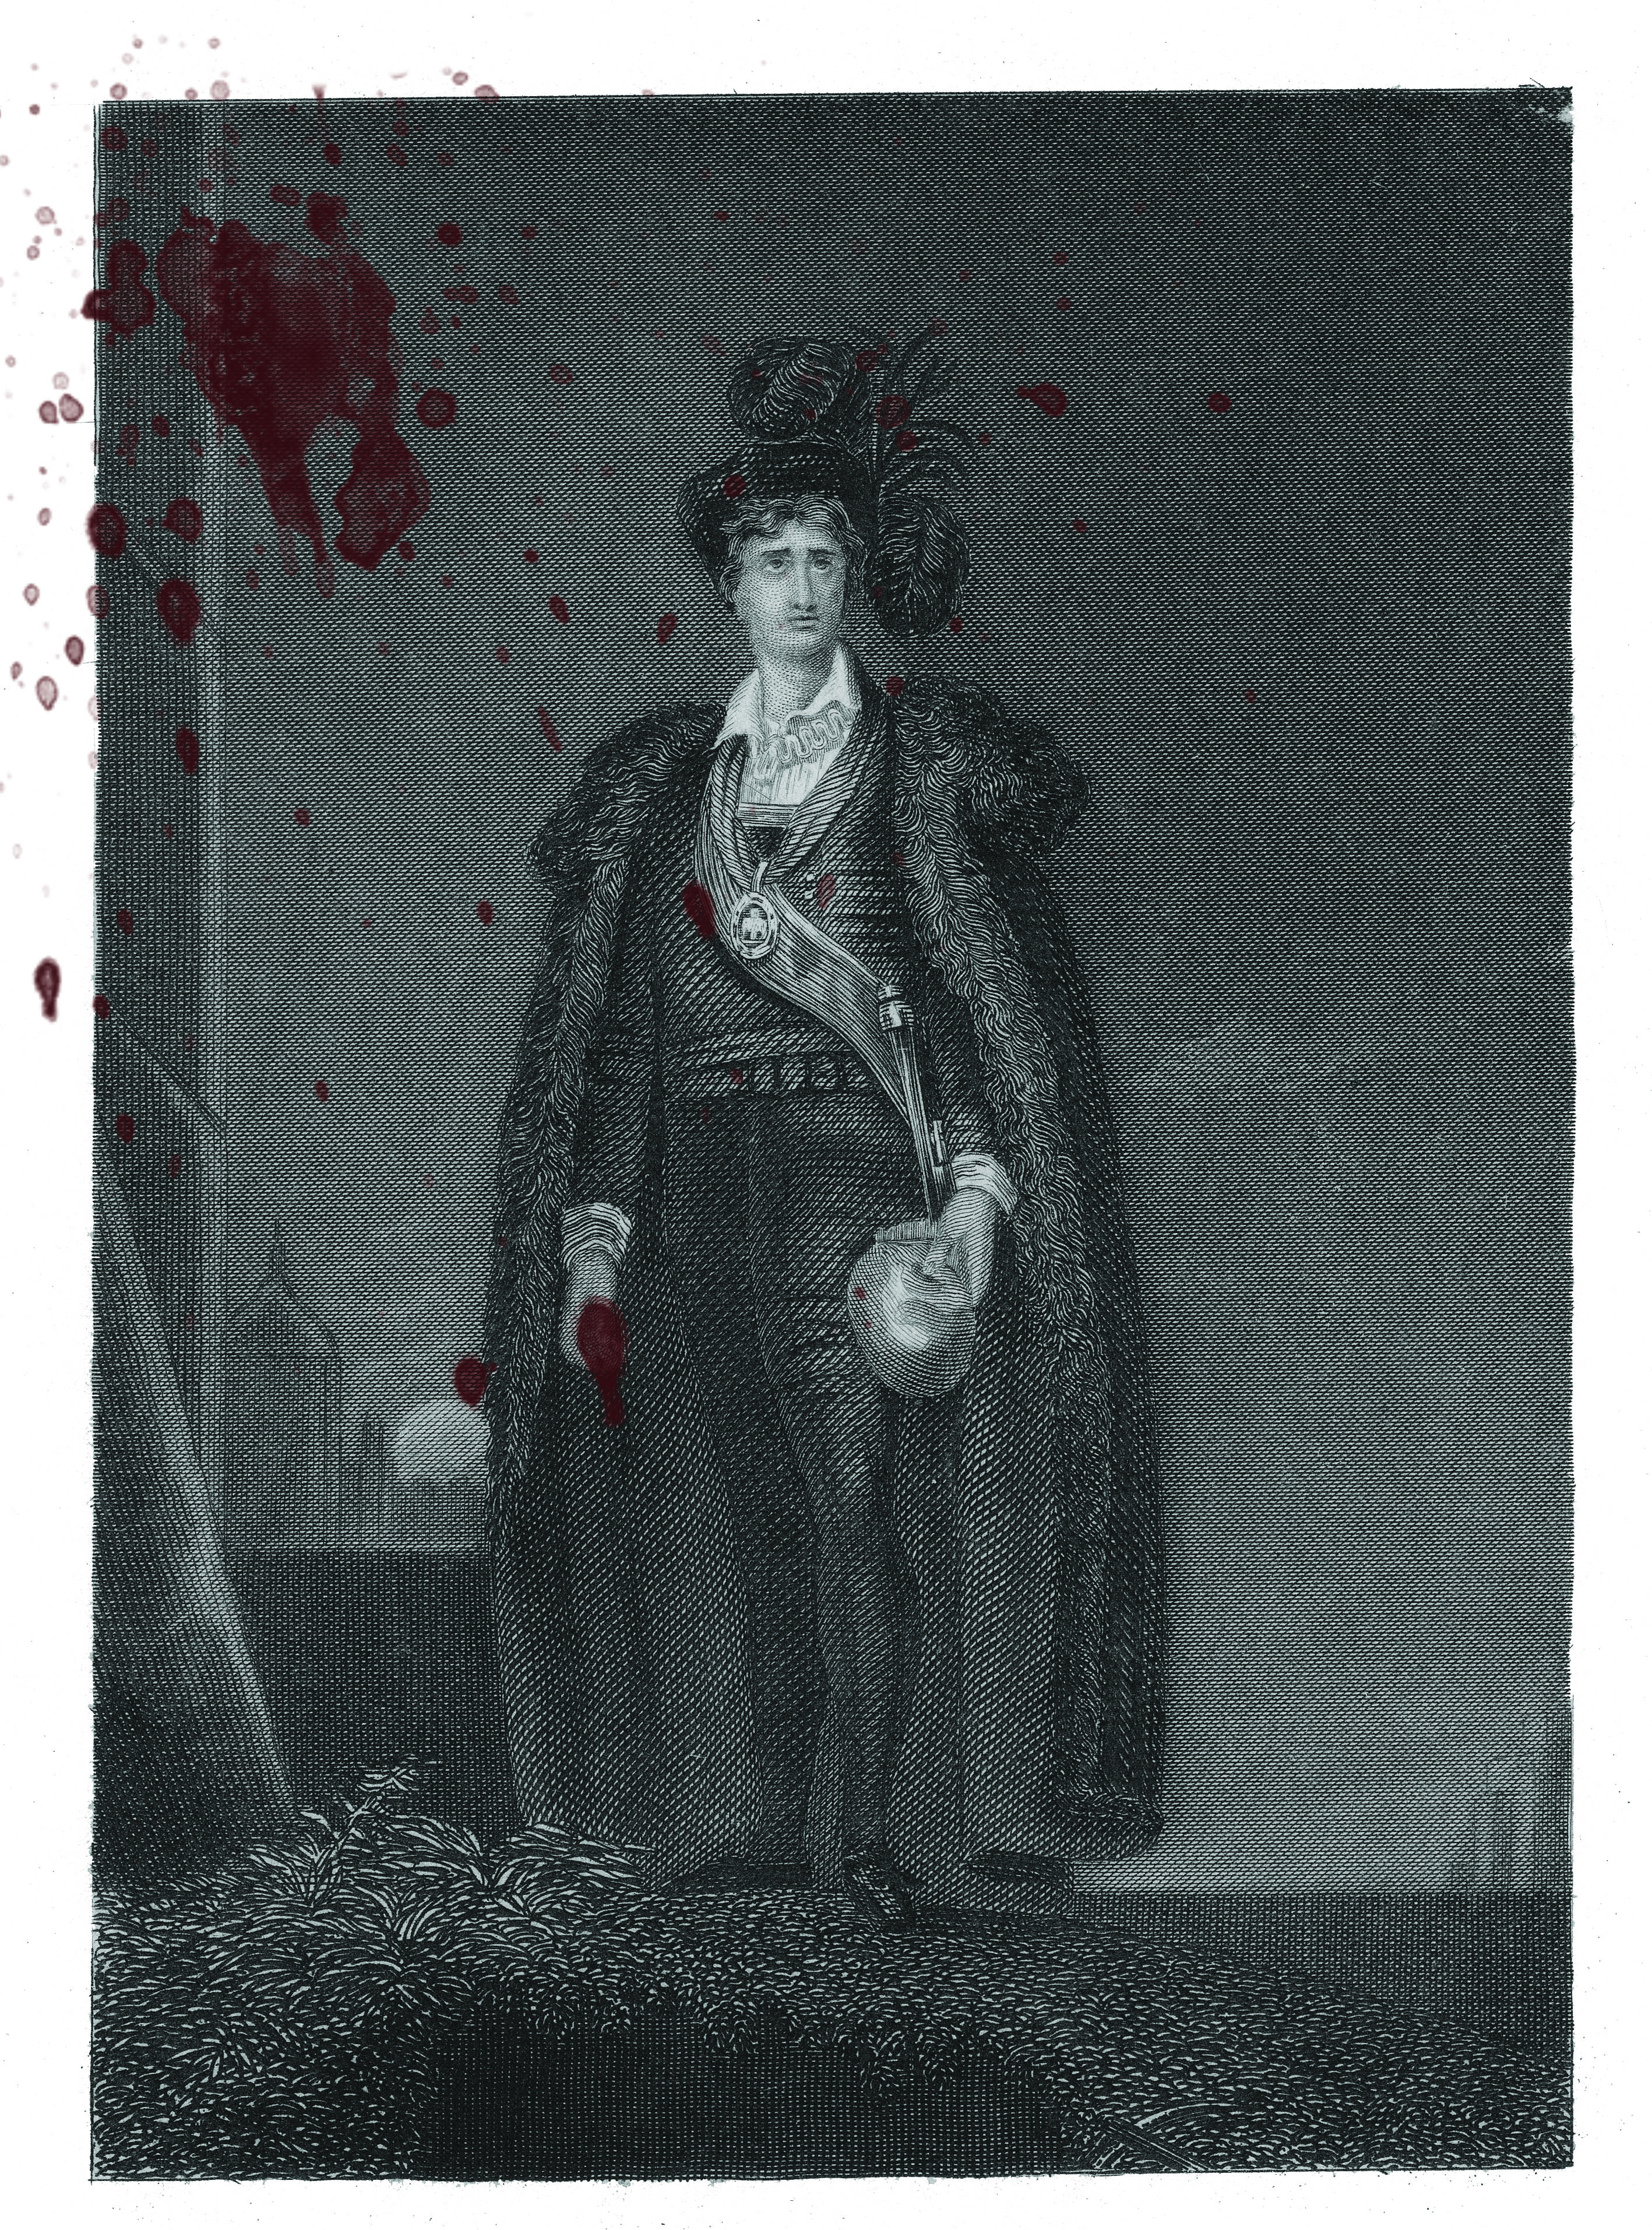 Hamlet portrait covered in blood drops